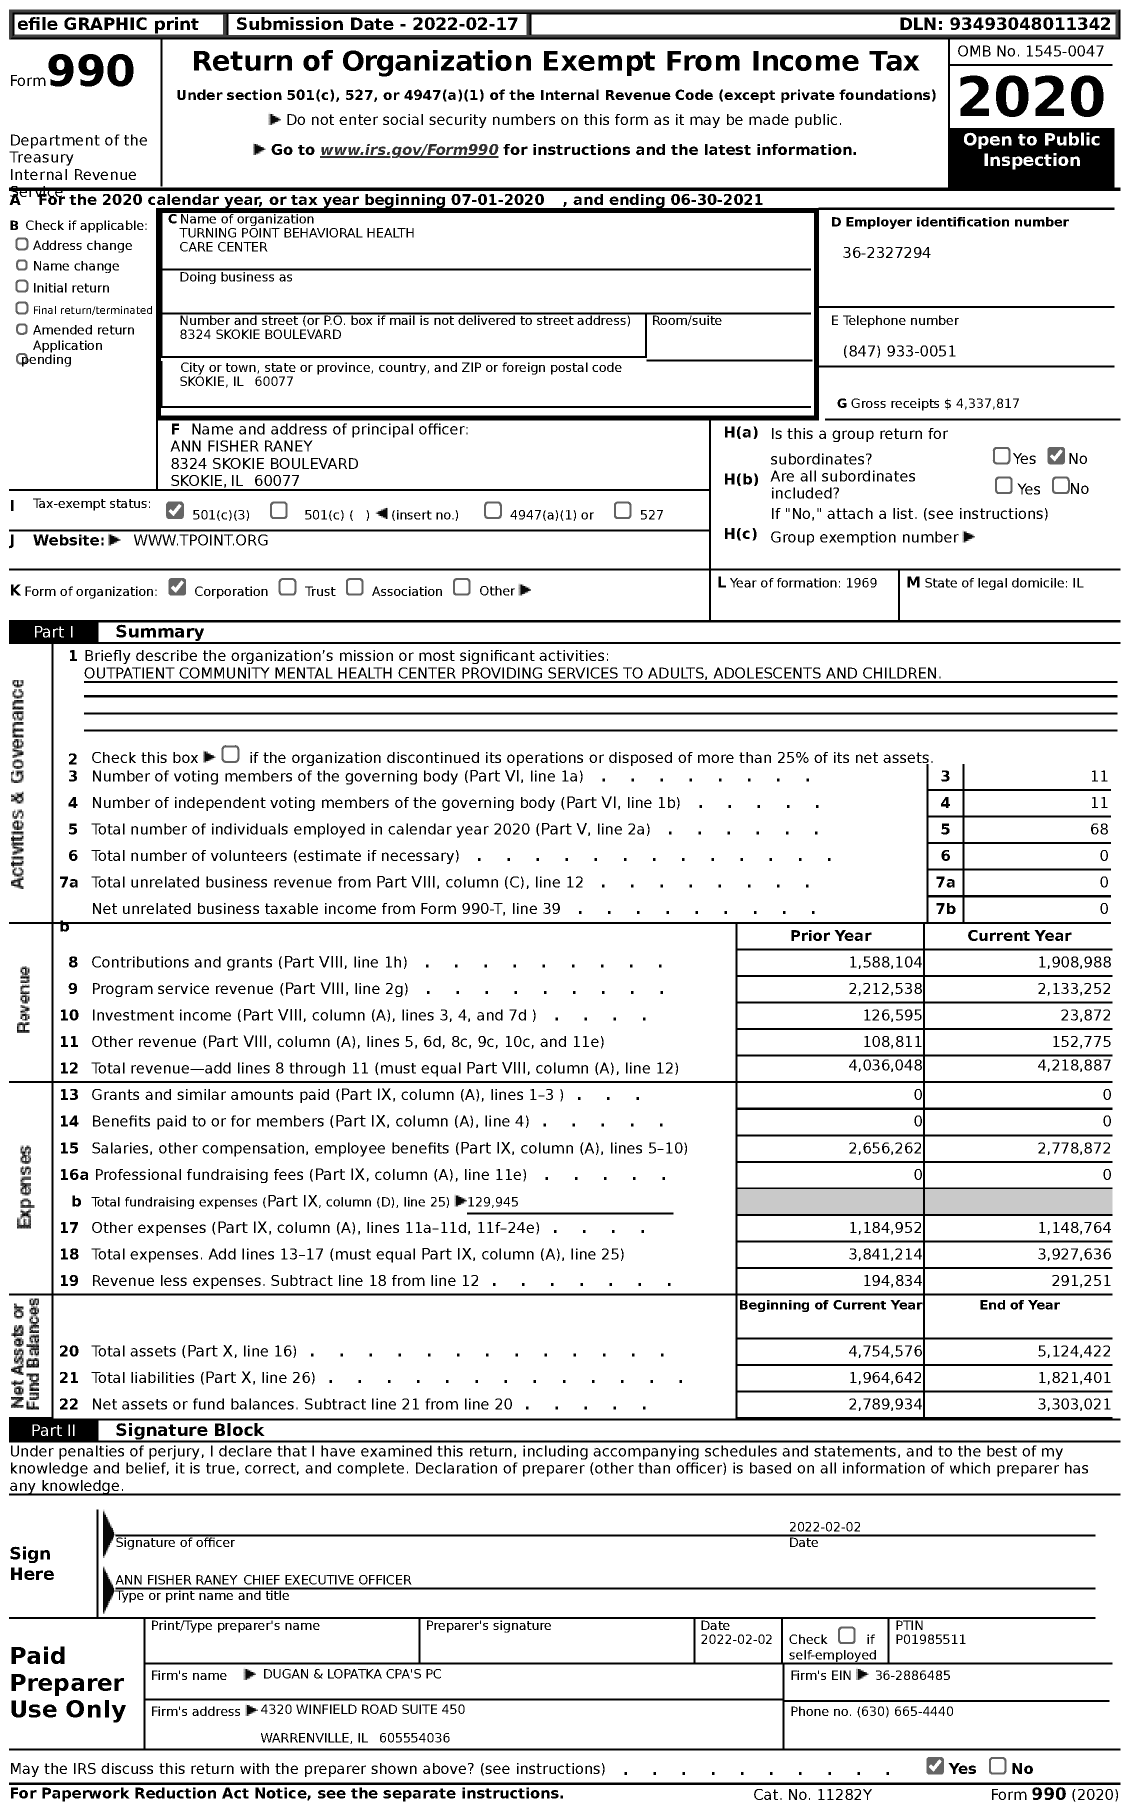 Image of first page of 2020 Form 990 for Turning Point Behavioral Health Care Center